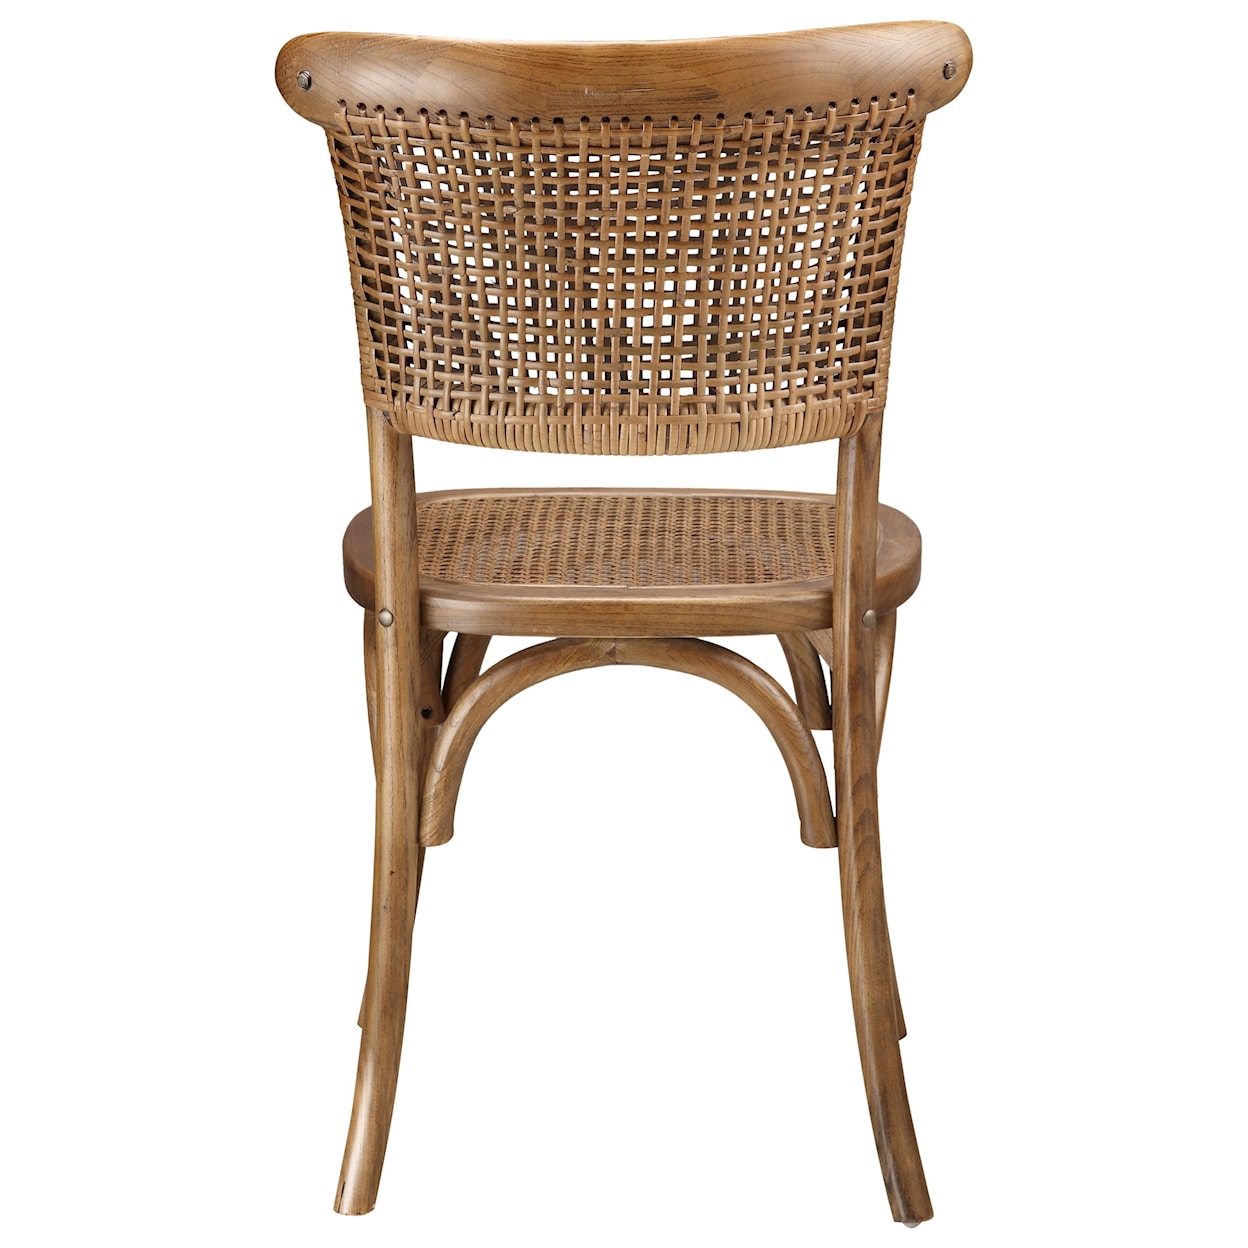 Moe's Home Collection Churchill Dining Chairs with Rattan Seat